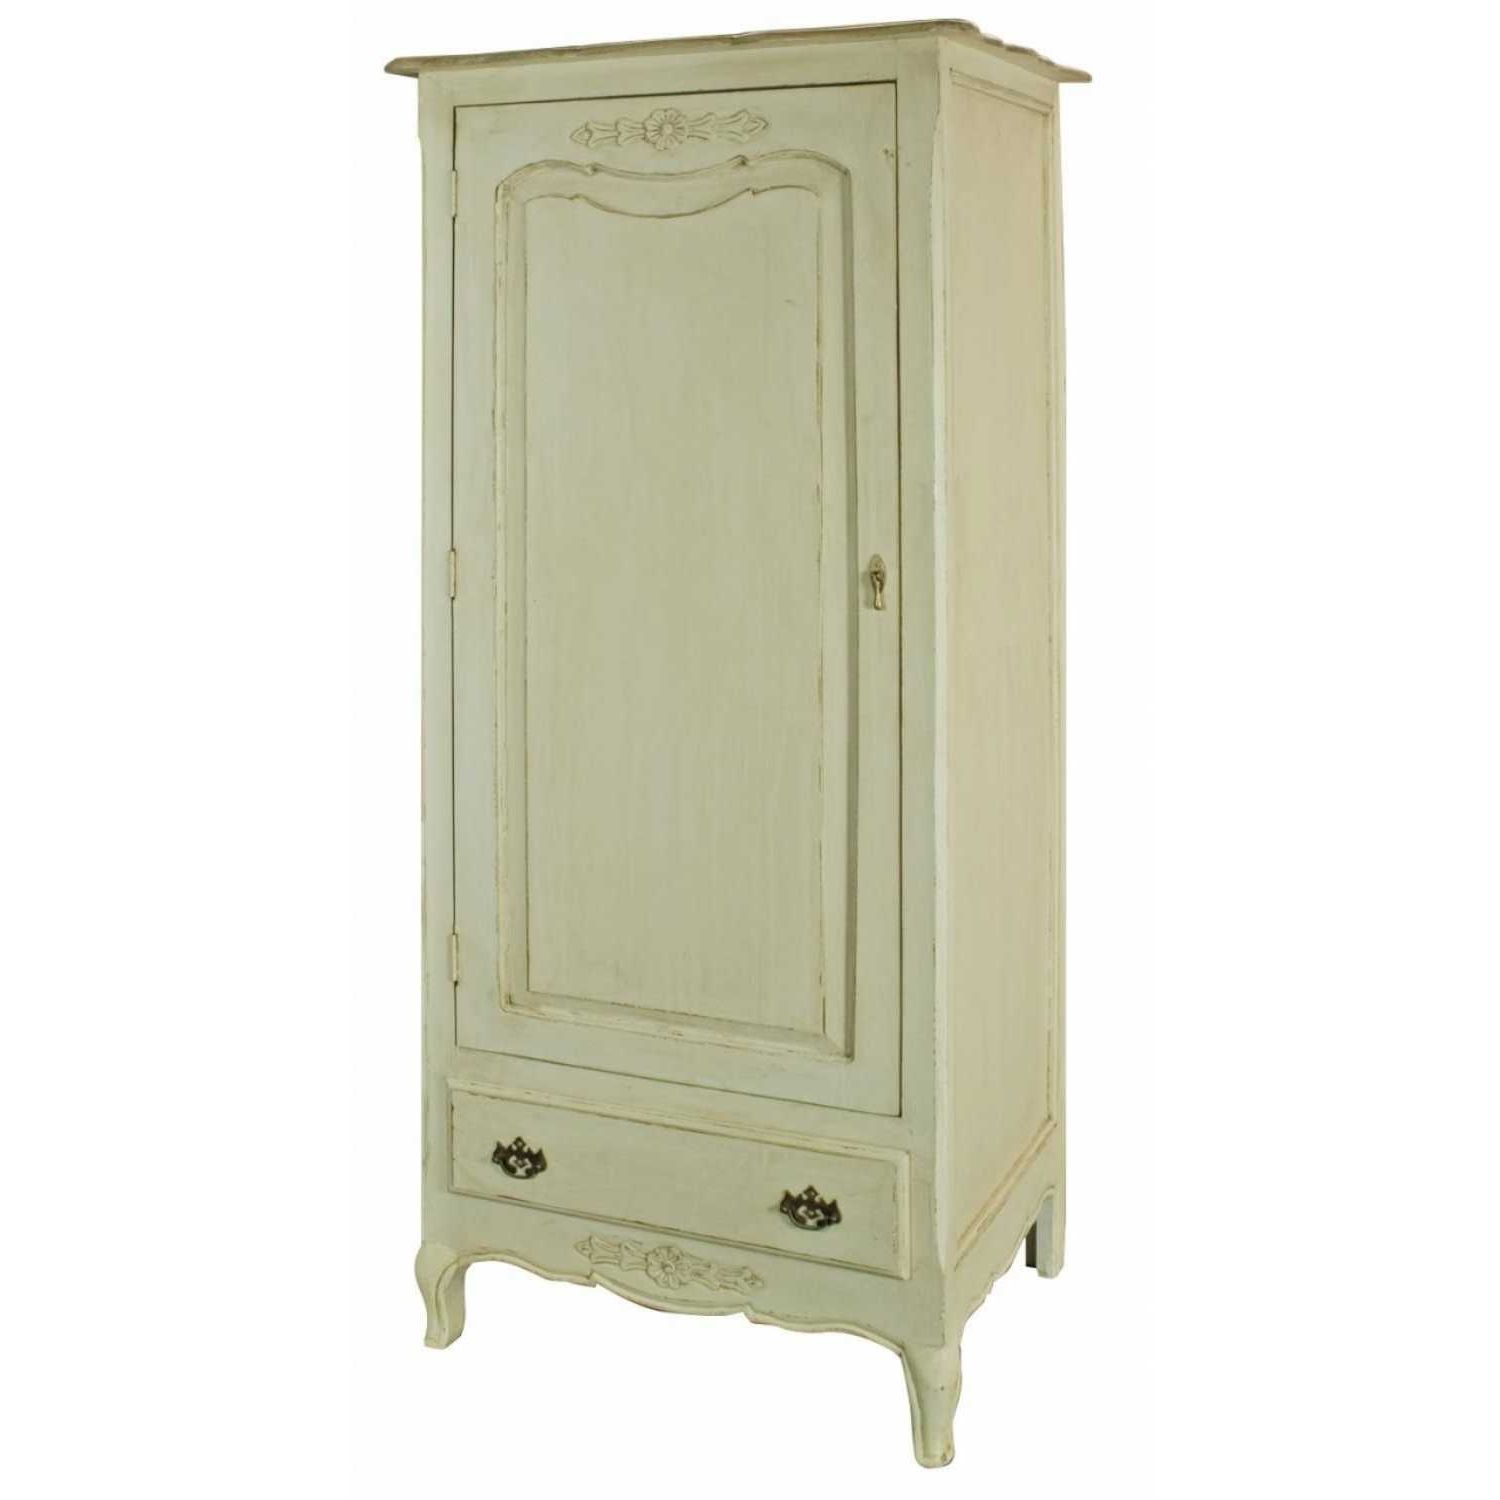 Preferred Single Wardrobe Amberly Shabby Chic With Regard To Chic Wardrobes (View 7 of 15)